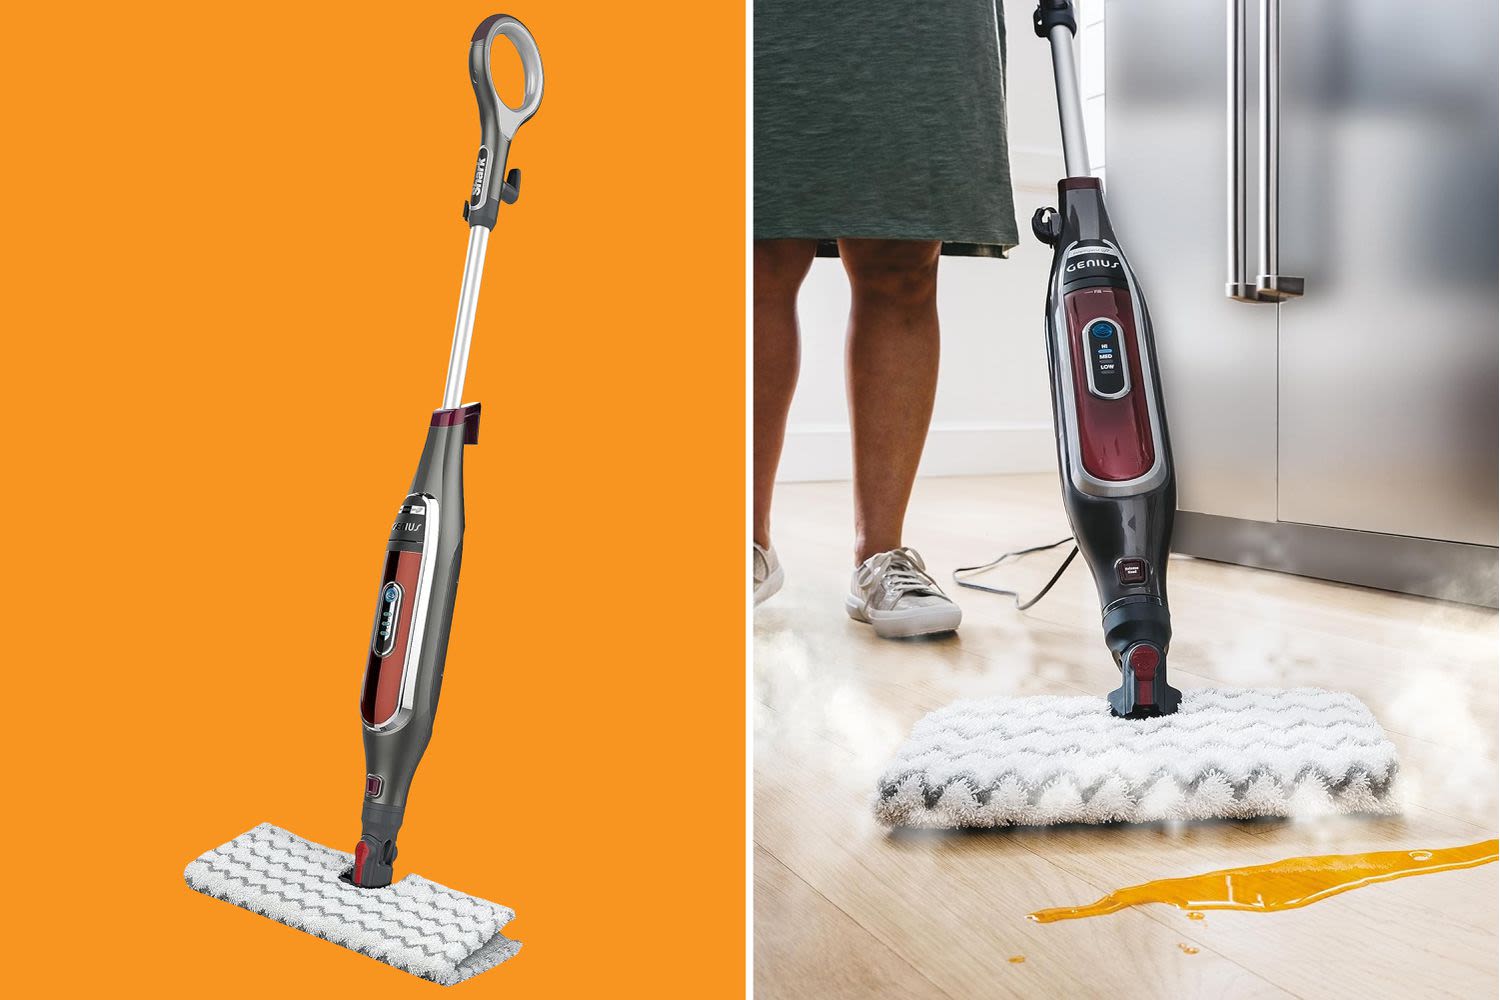 This Shark Steam Mop with 9,700+ Five-Star Ratings Picks Up a ‘Shocking’ Amount of Dirt, and It’s on Sale Today